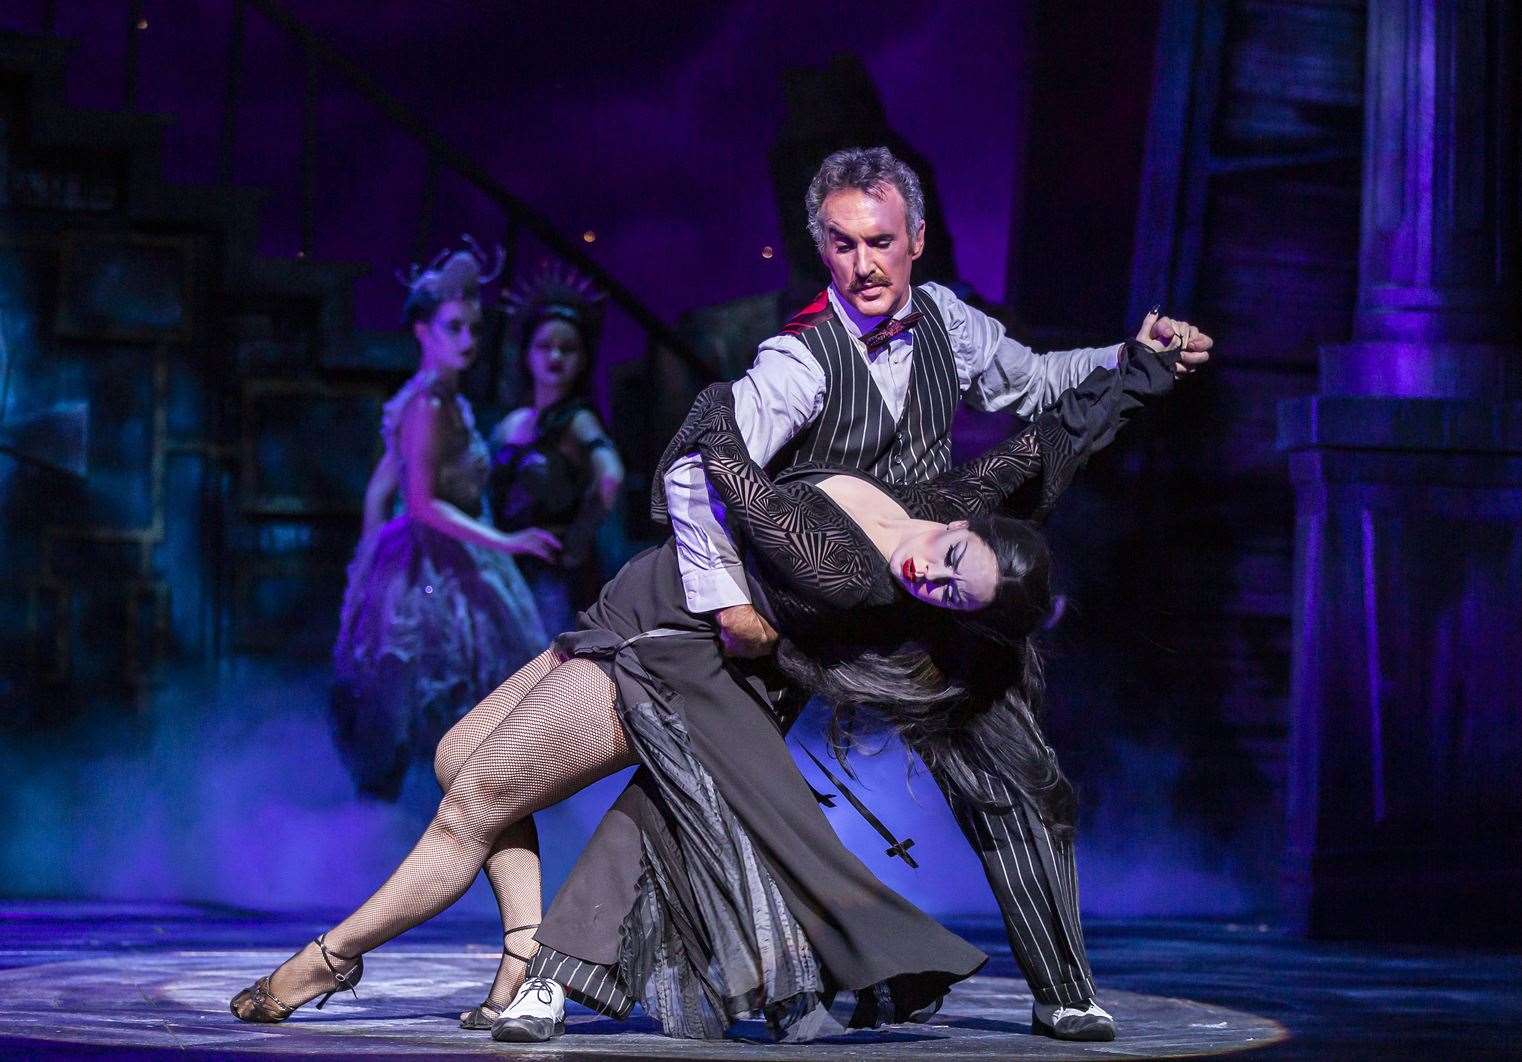 Joanne Clifton swaps the ballroom for the stage in the Addams Family. Picture: Pamela Raith.